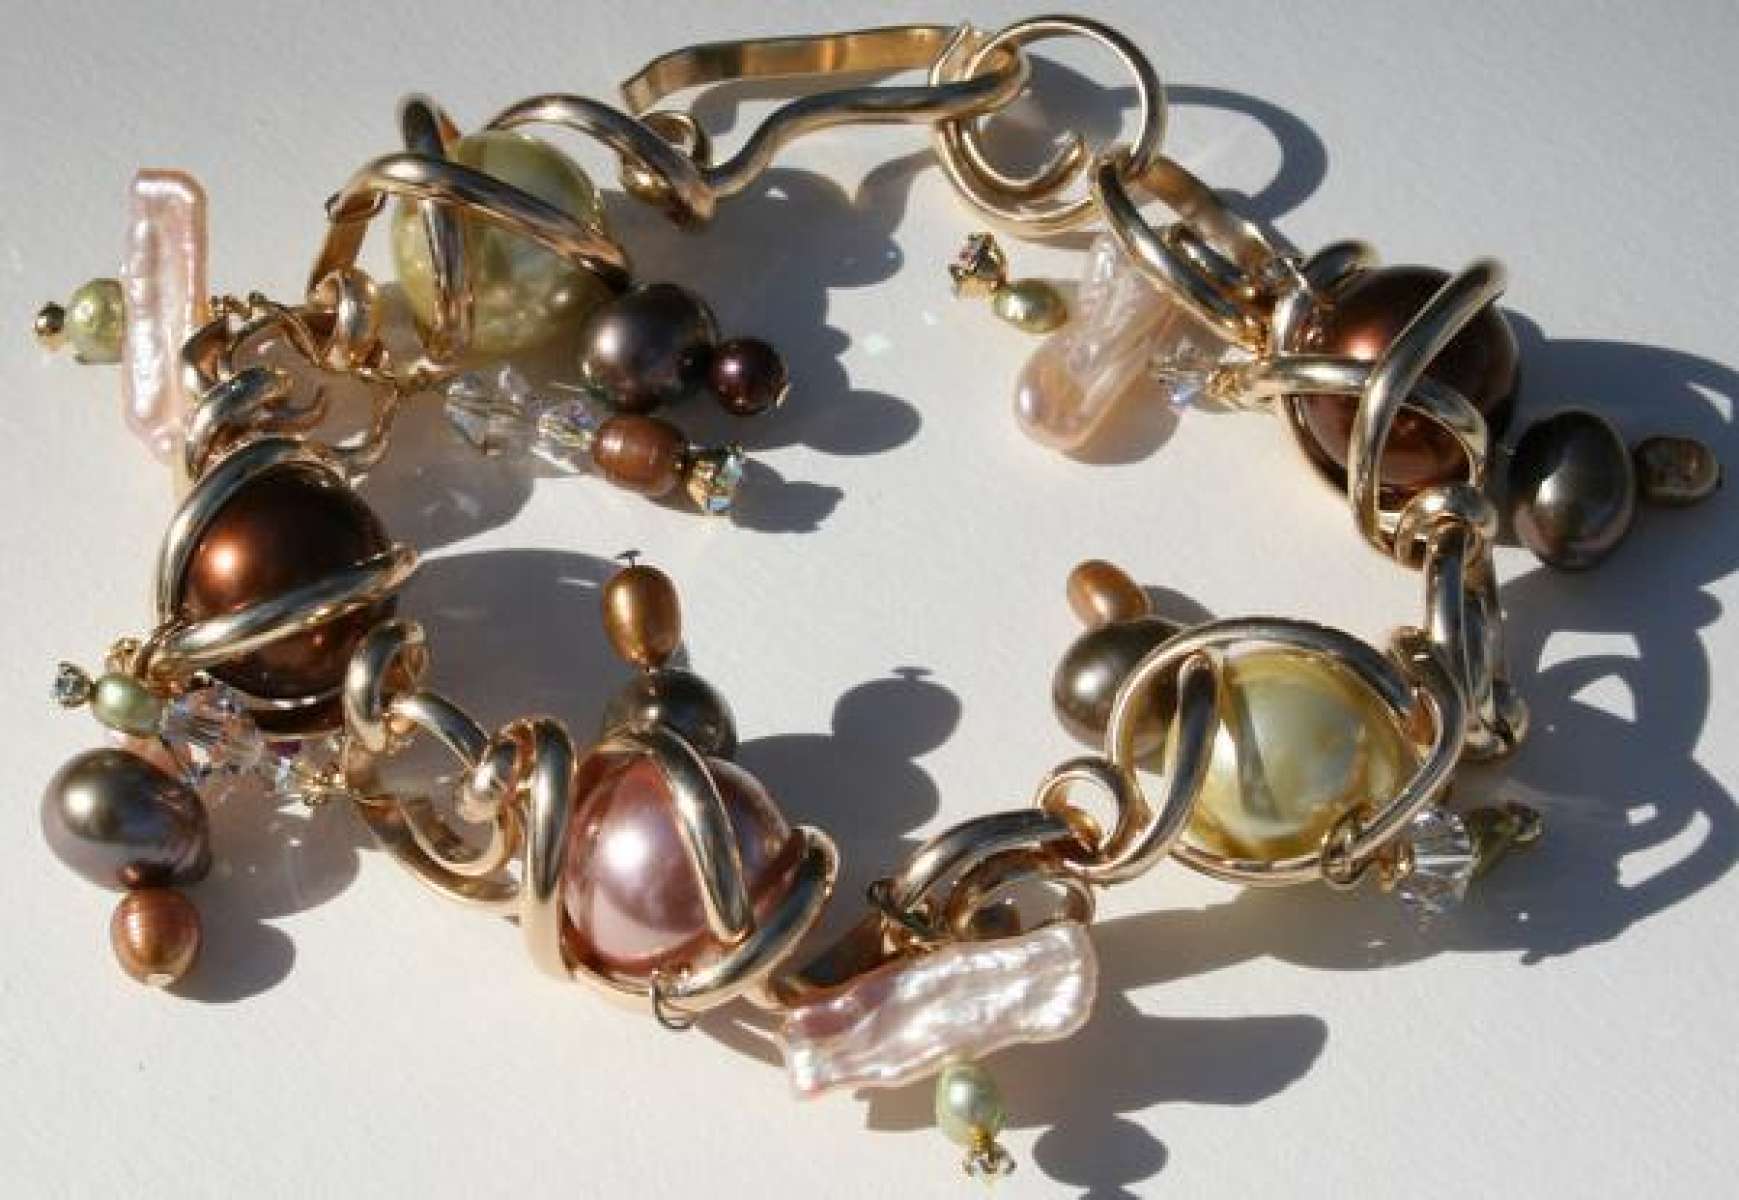 Twists and Turns bracelet with Swarovski and pearls